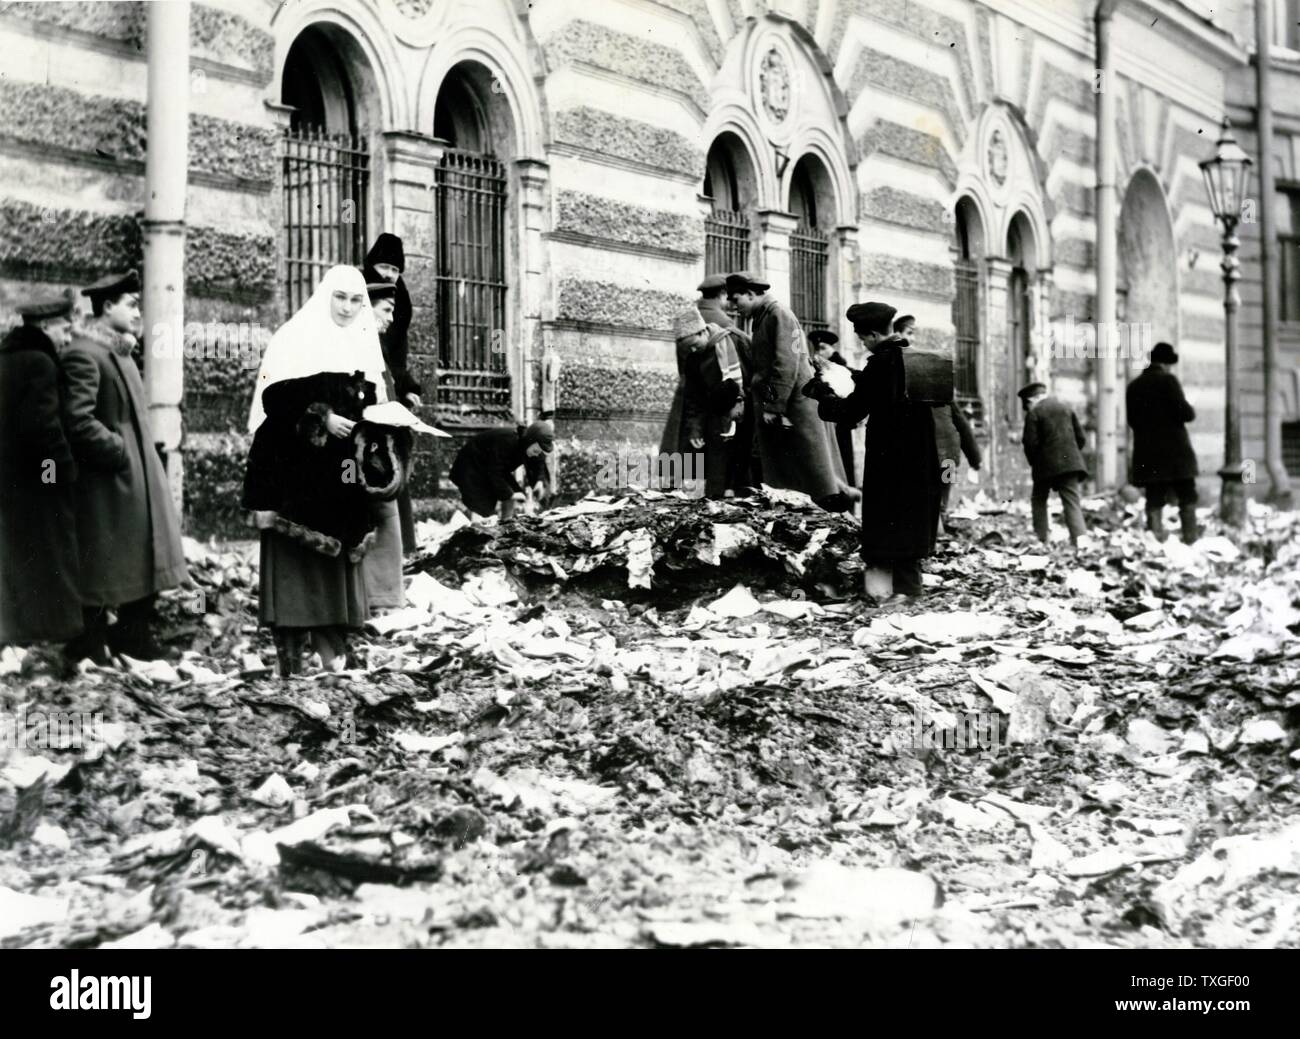 Street scene after looting in a Russian city during the 1917 Russian Revolution. Stock Photo